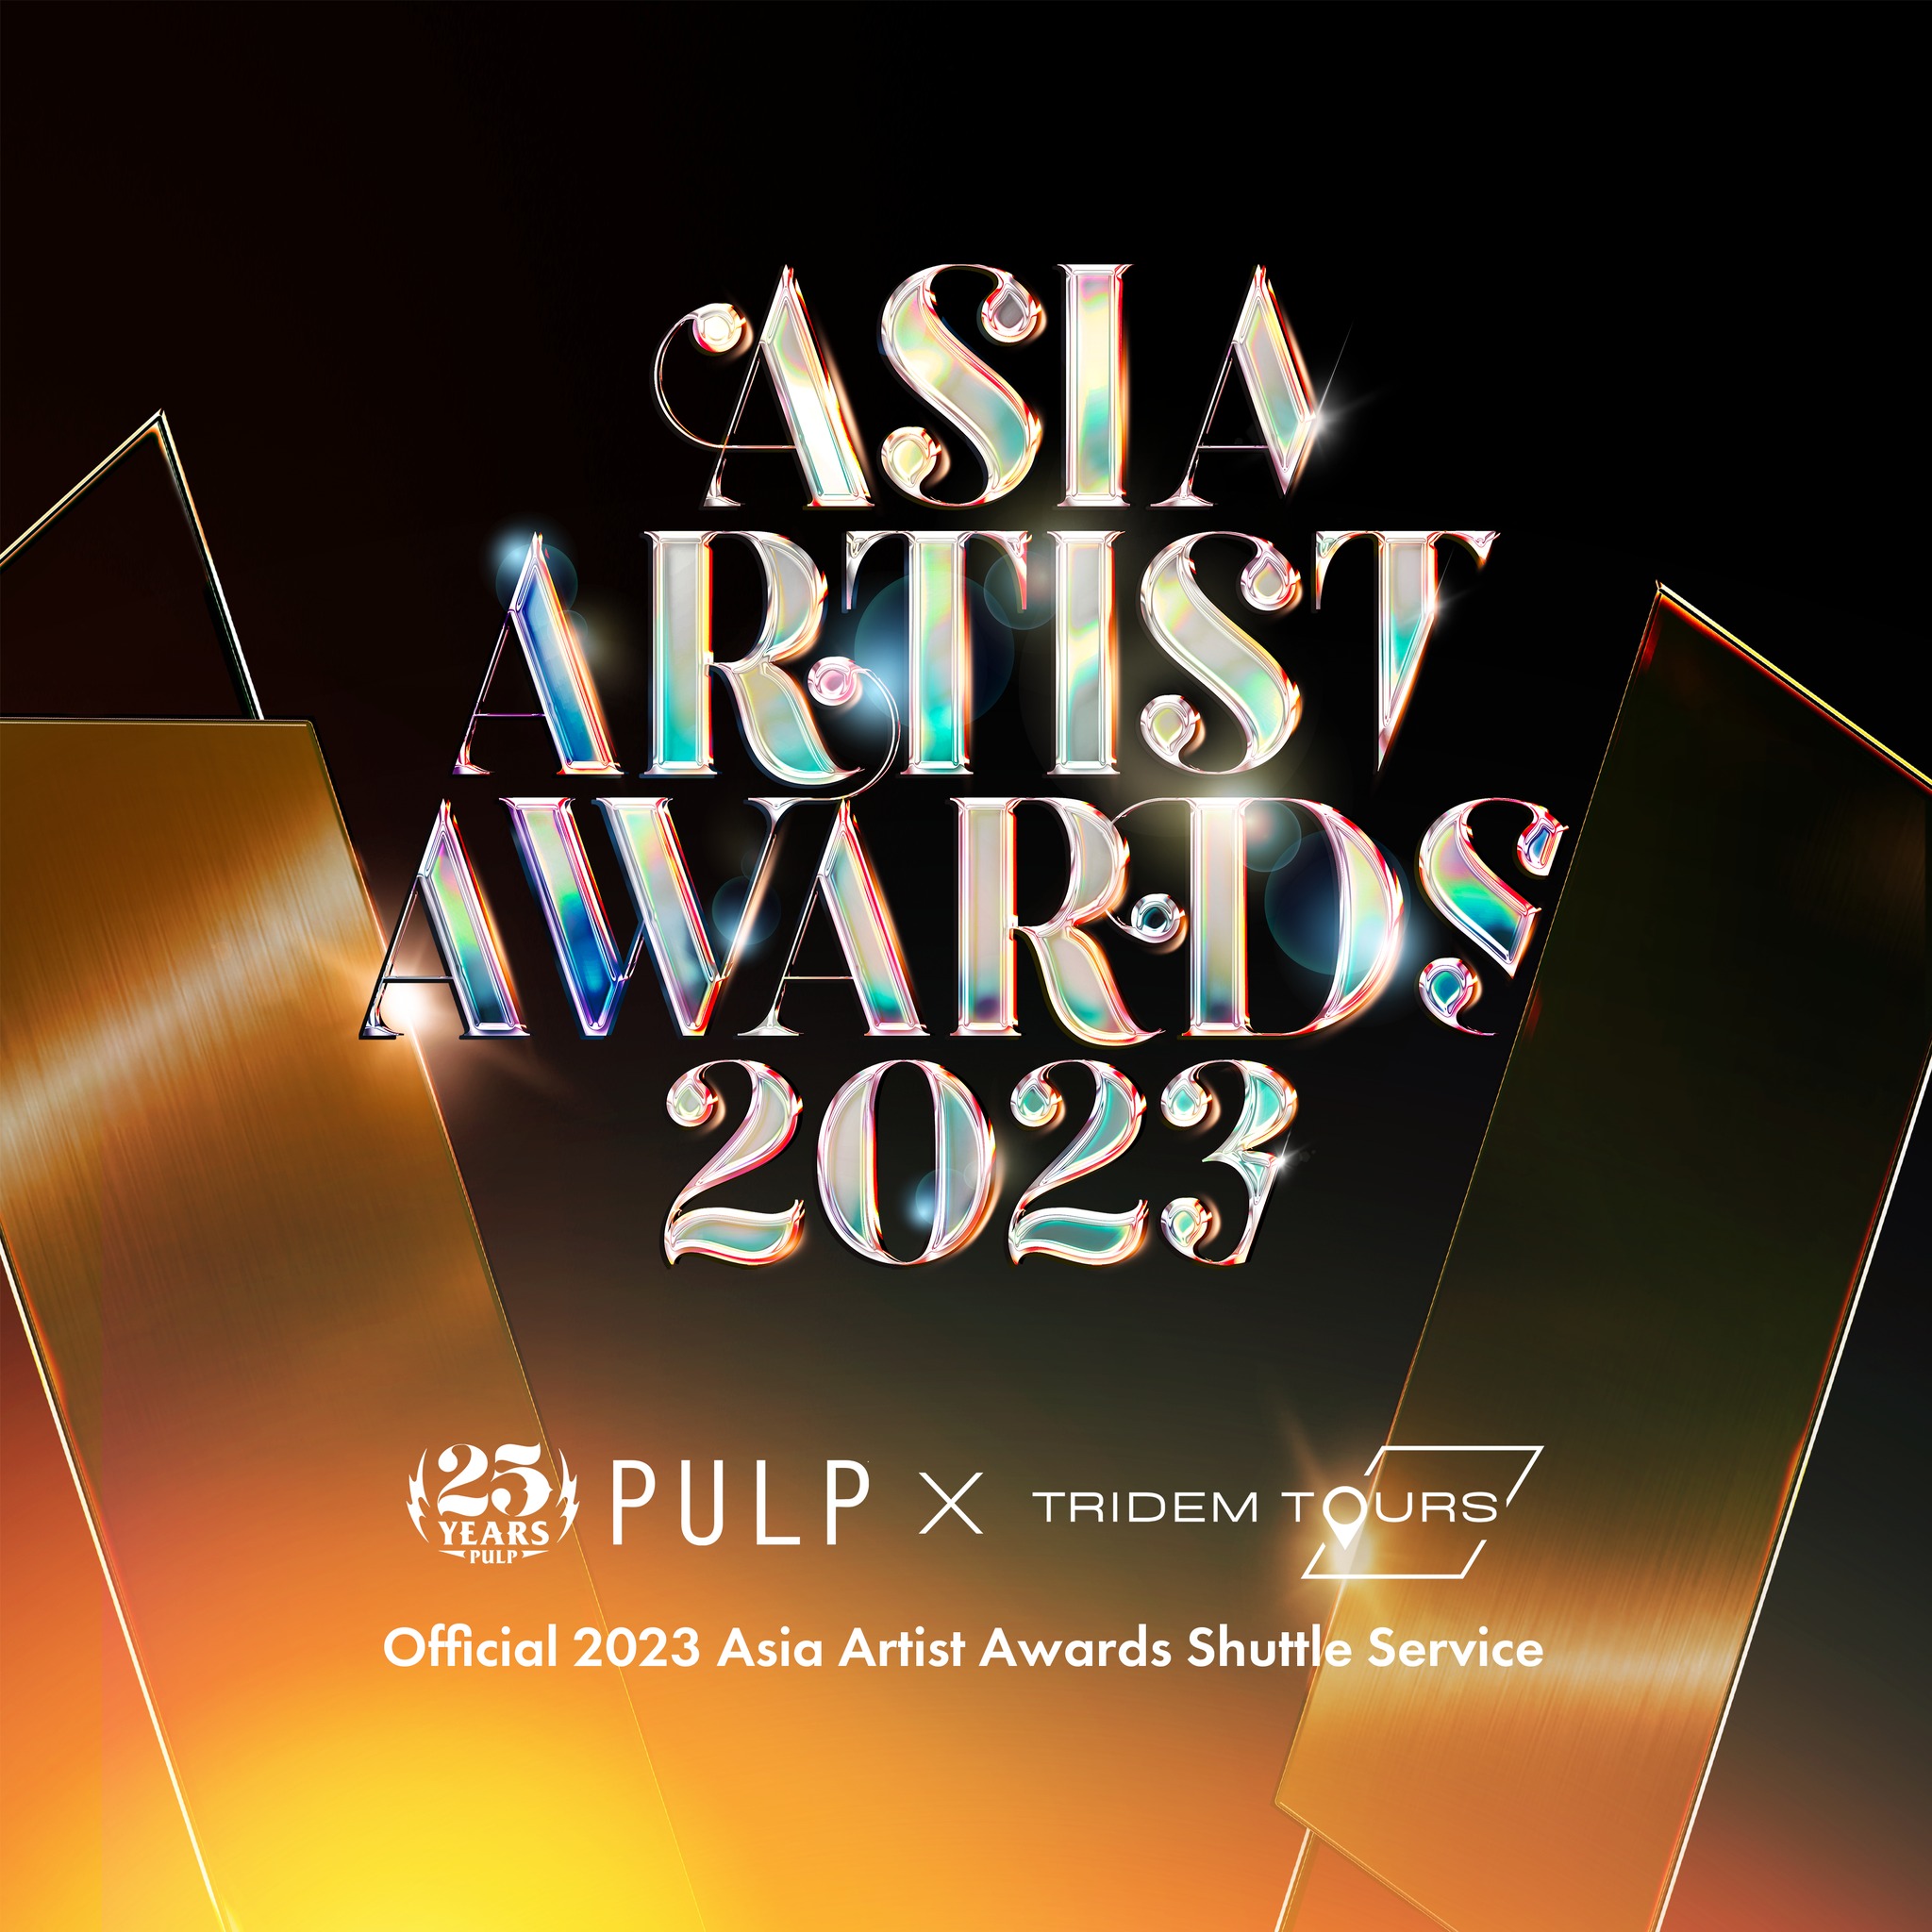 asia artist awards 2023 - first ever in the Philippines